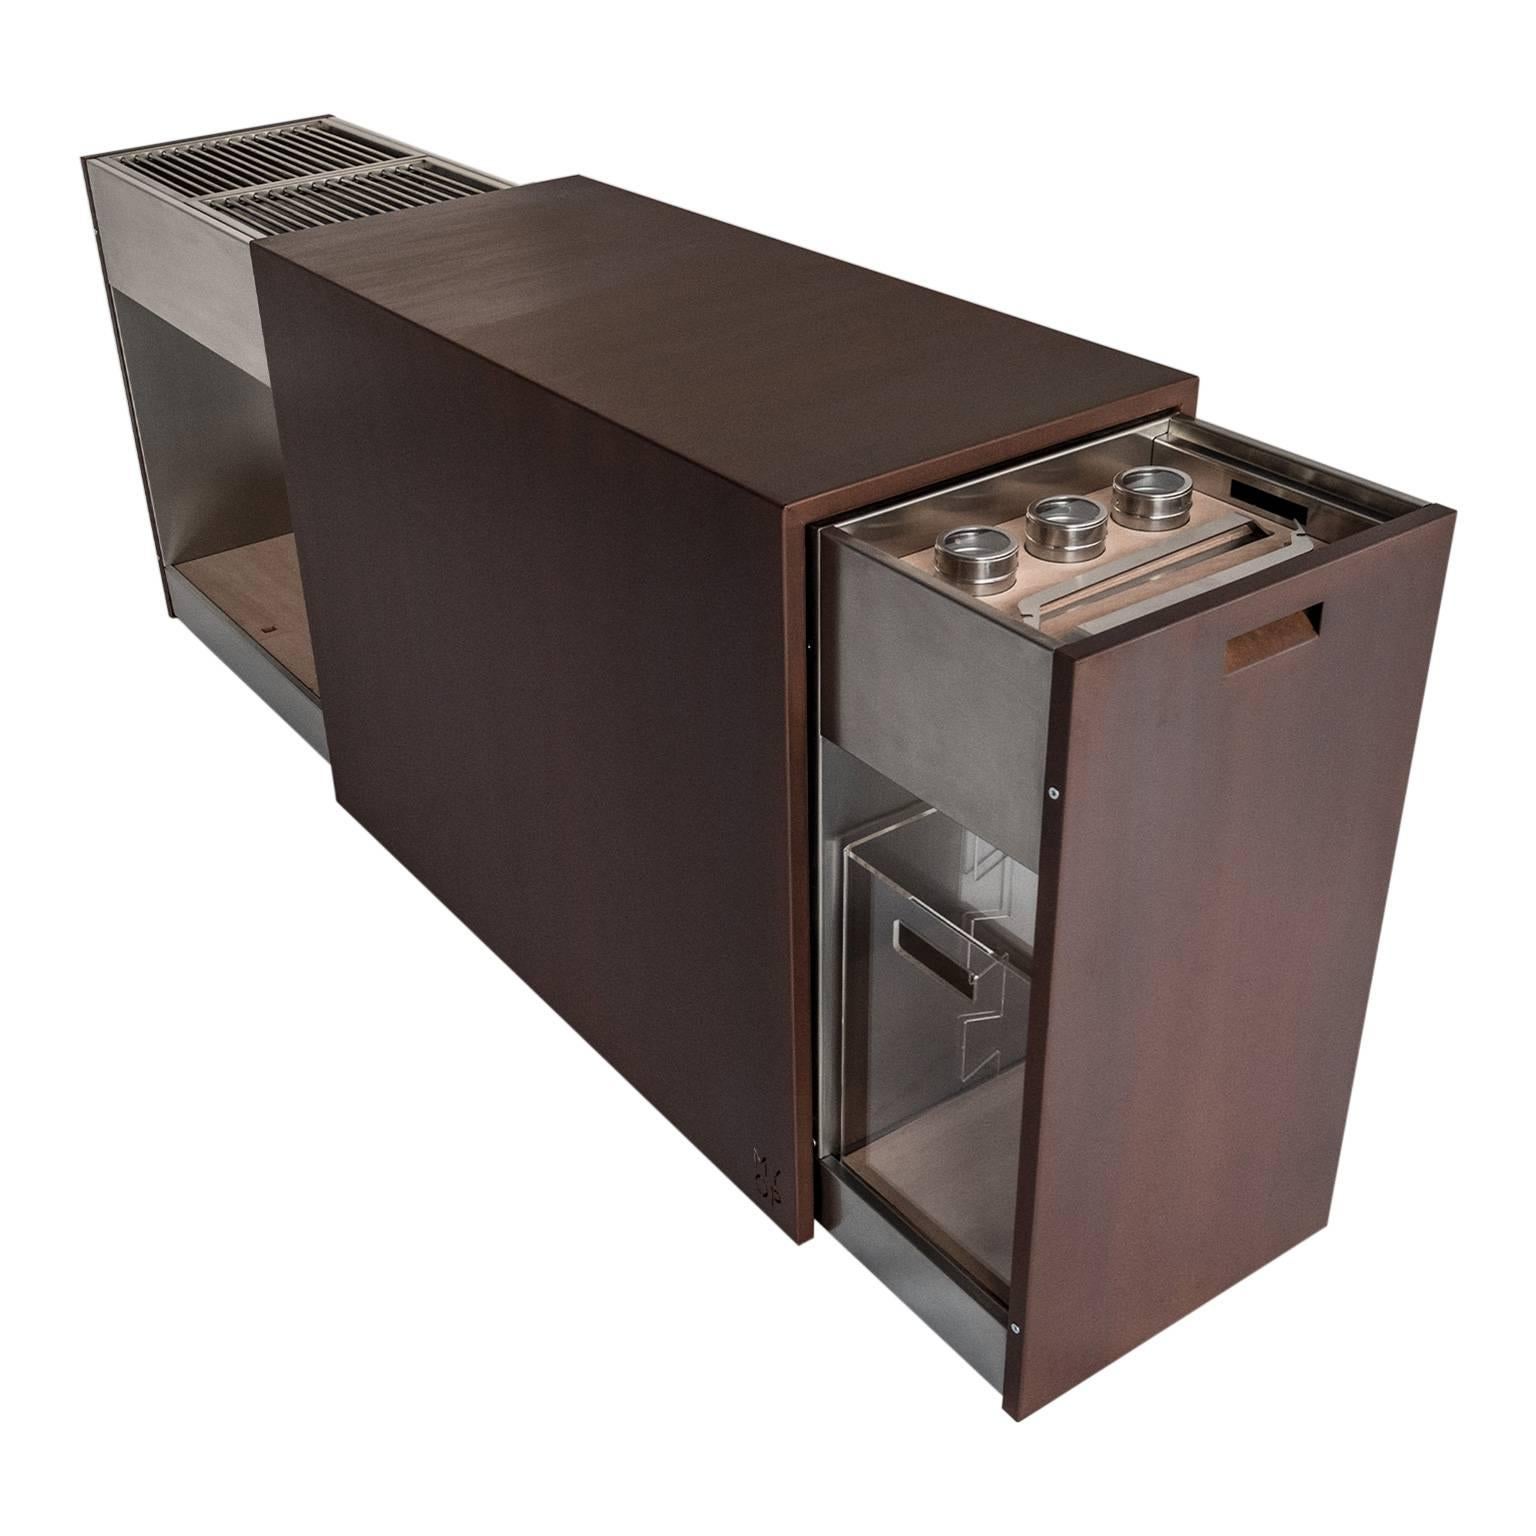 Elegant Corten Outdoor Charcoal Barbecue with Shelves and Cupboards, Snail (Moderne) im Angebot